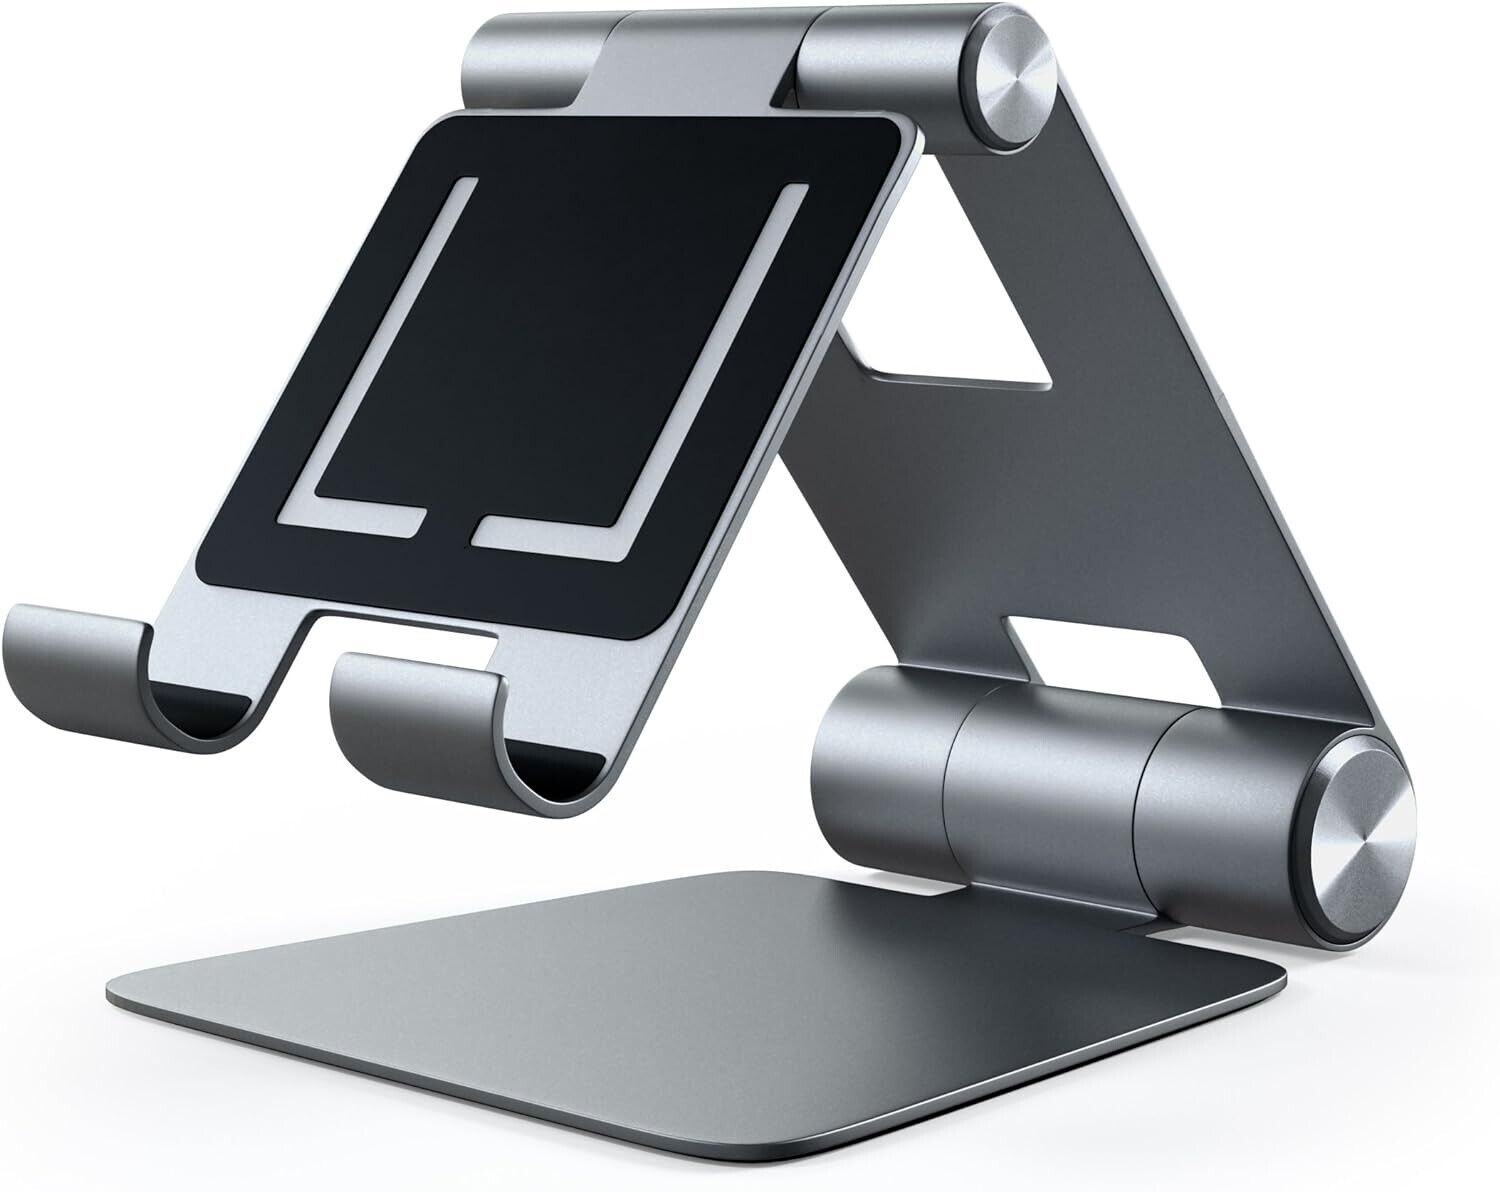 Satechi R1 Multi-Angle Foldable Tablet Stand (Space Gray)